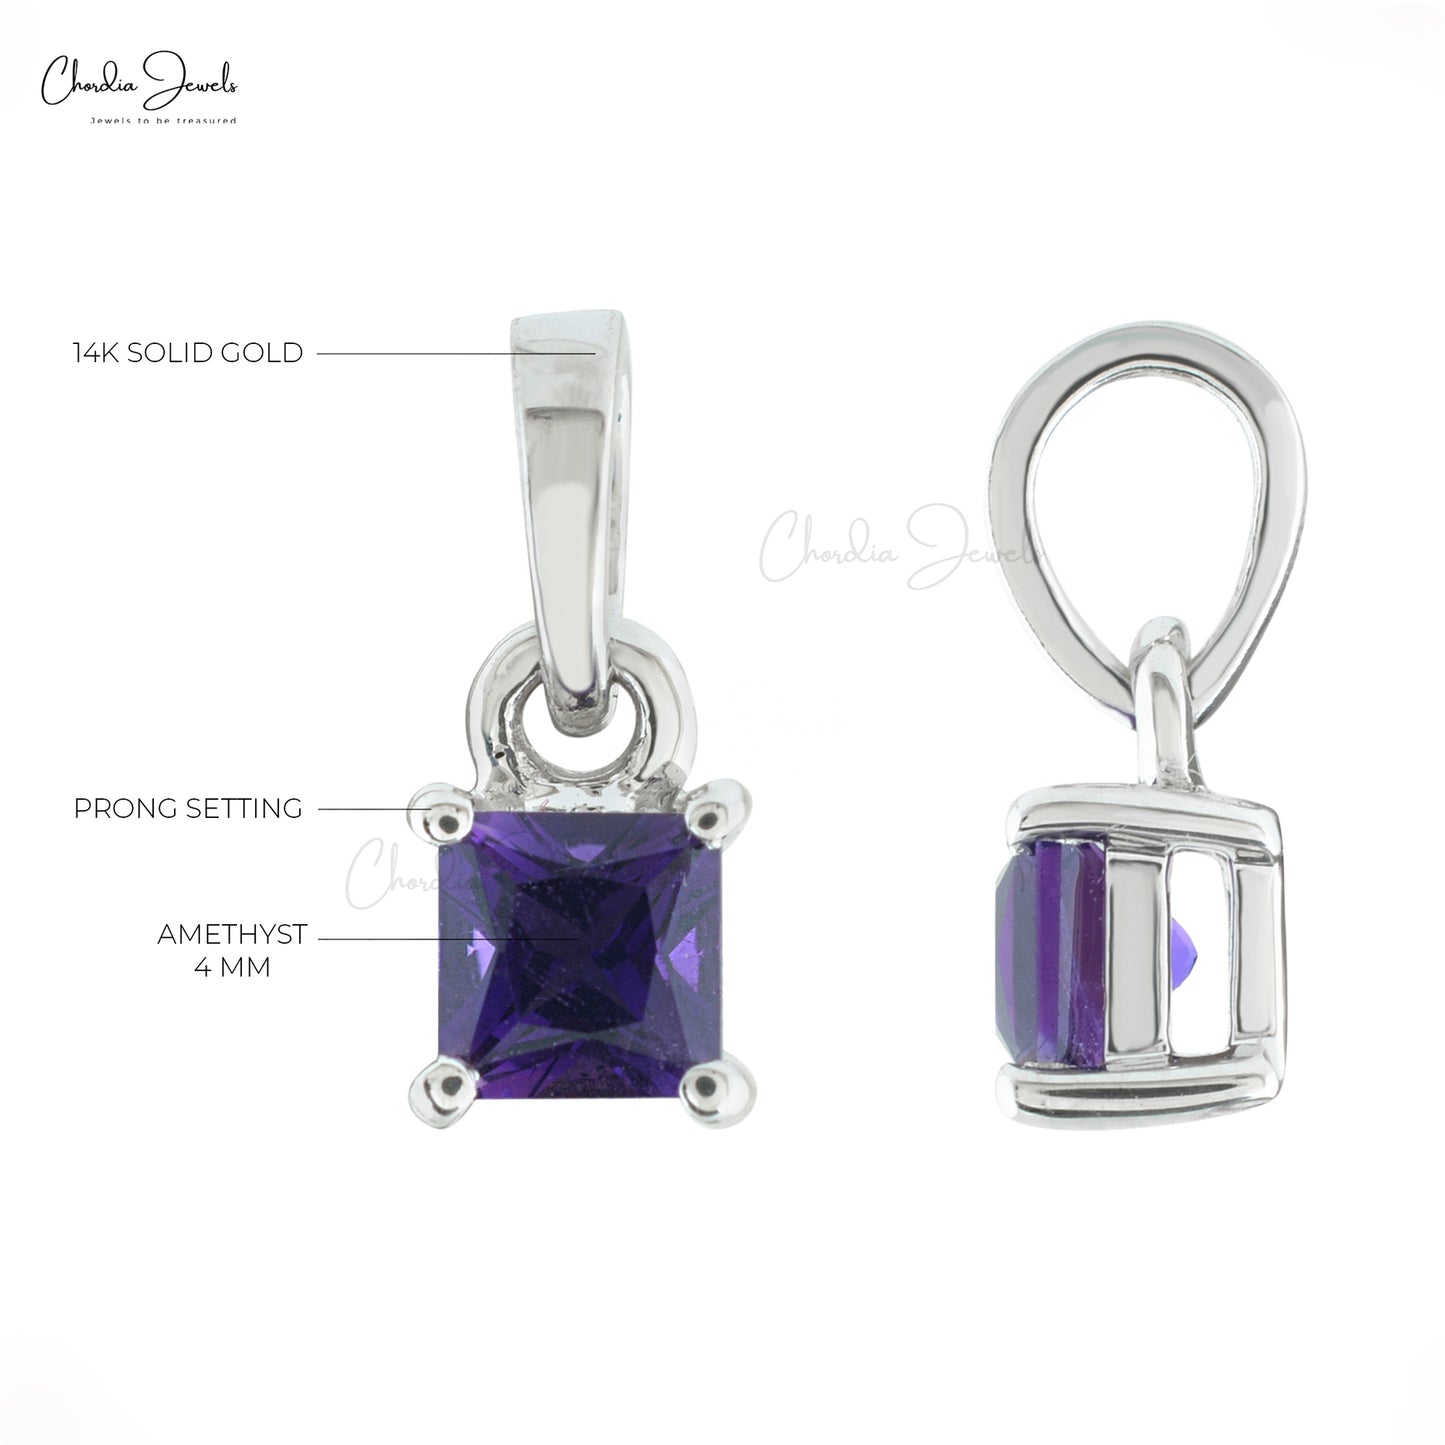 Load image into Gallery viewer, Genuine Amethyst Dainty Pendant 4mm Square Cut Gemstone Pendant 14k Solid White Gold Pendant For February Birthstone
